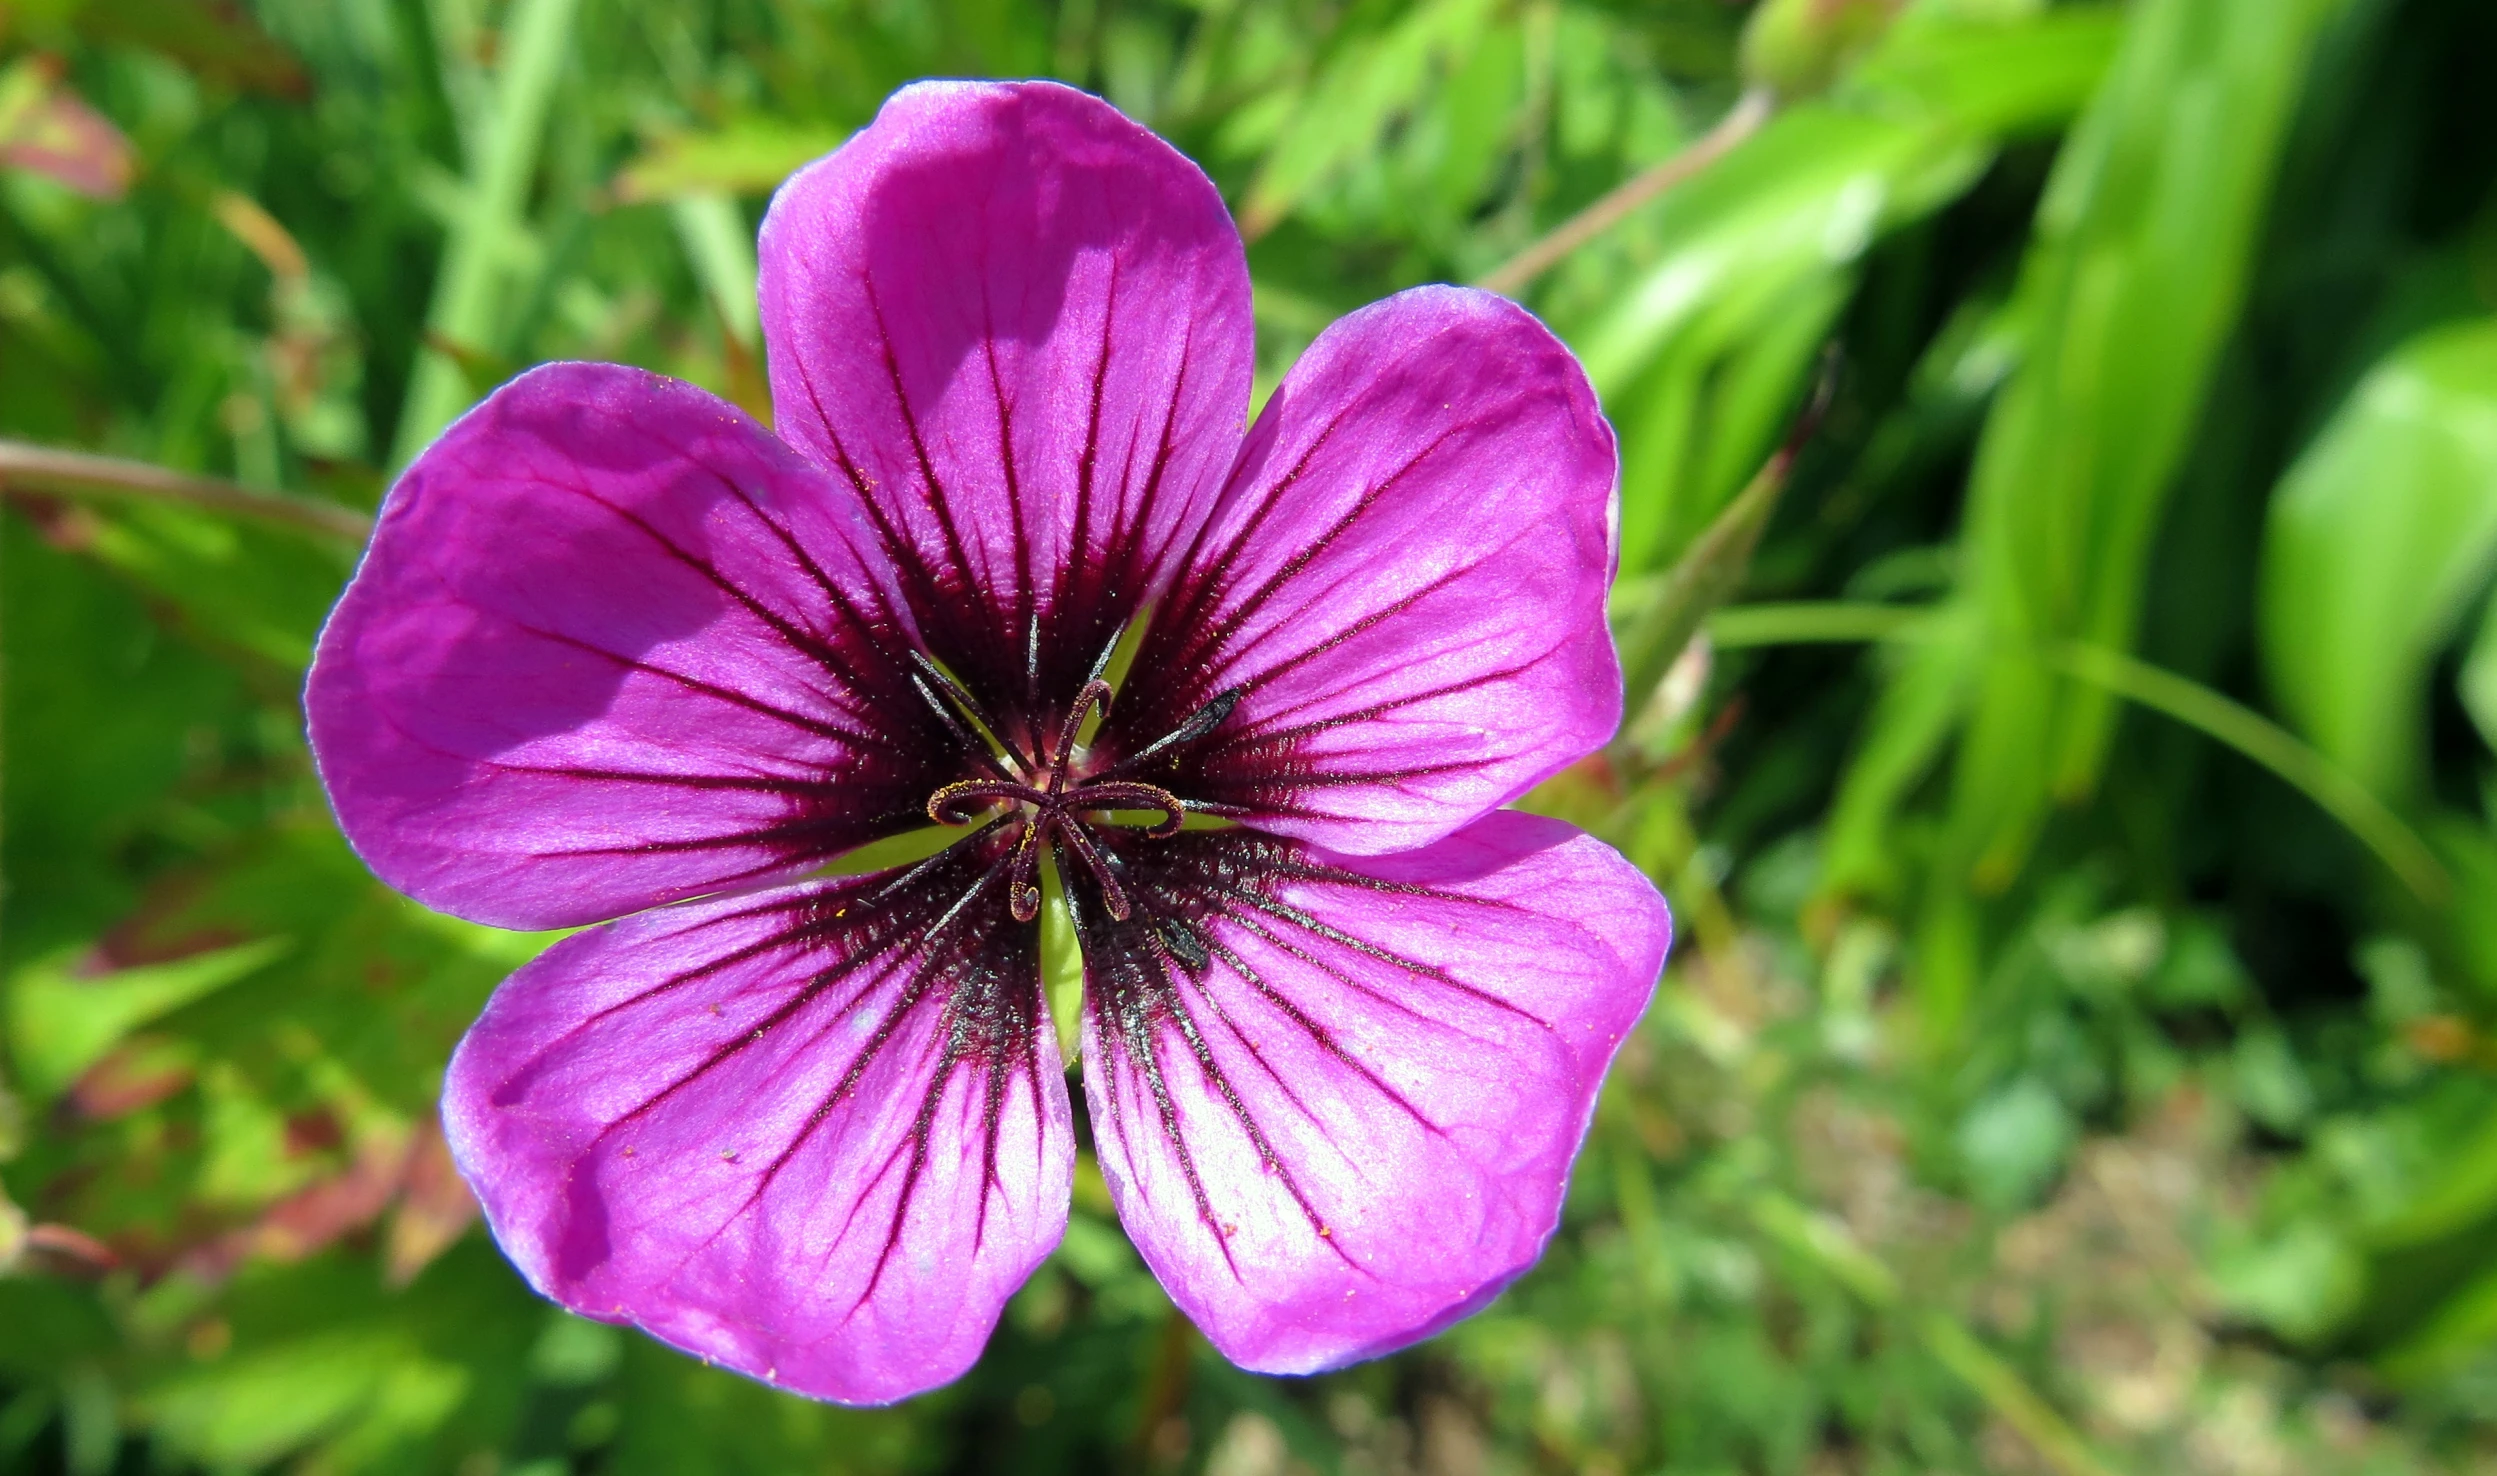 the large purple flower is growing through the grass